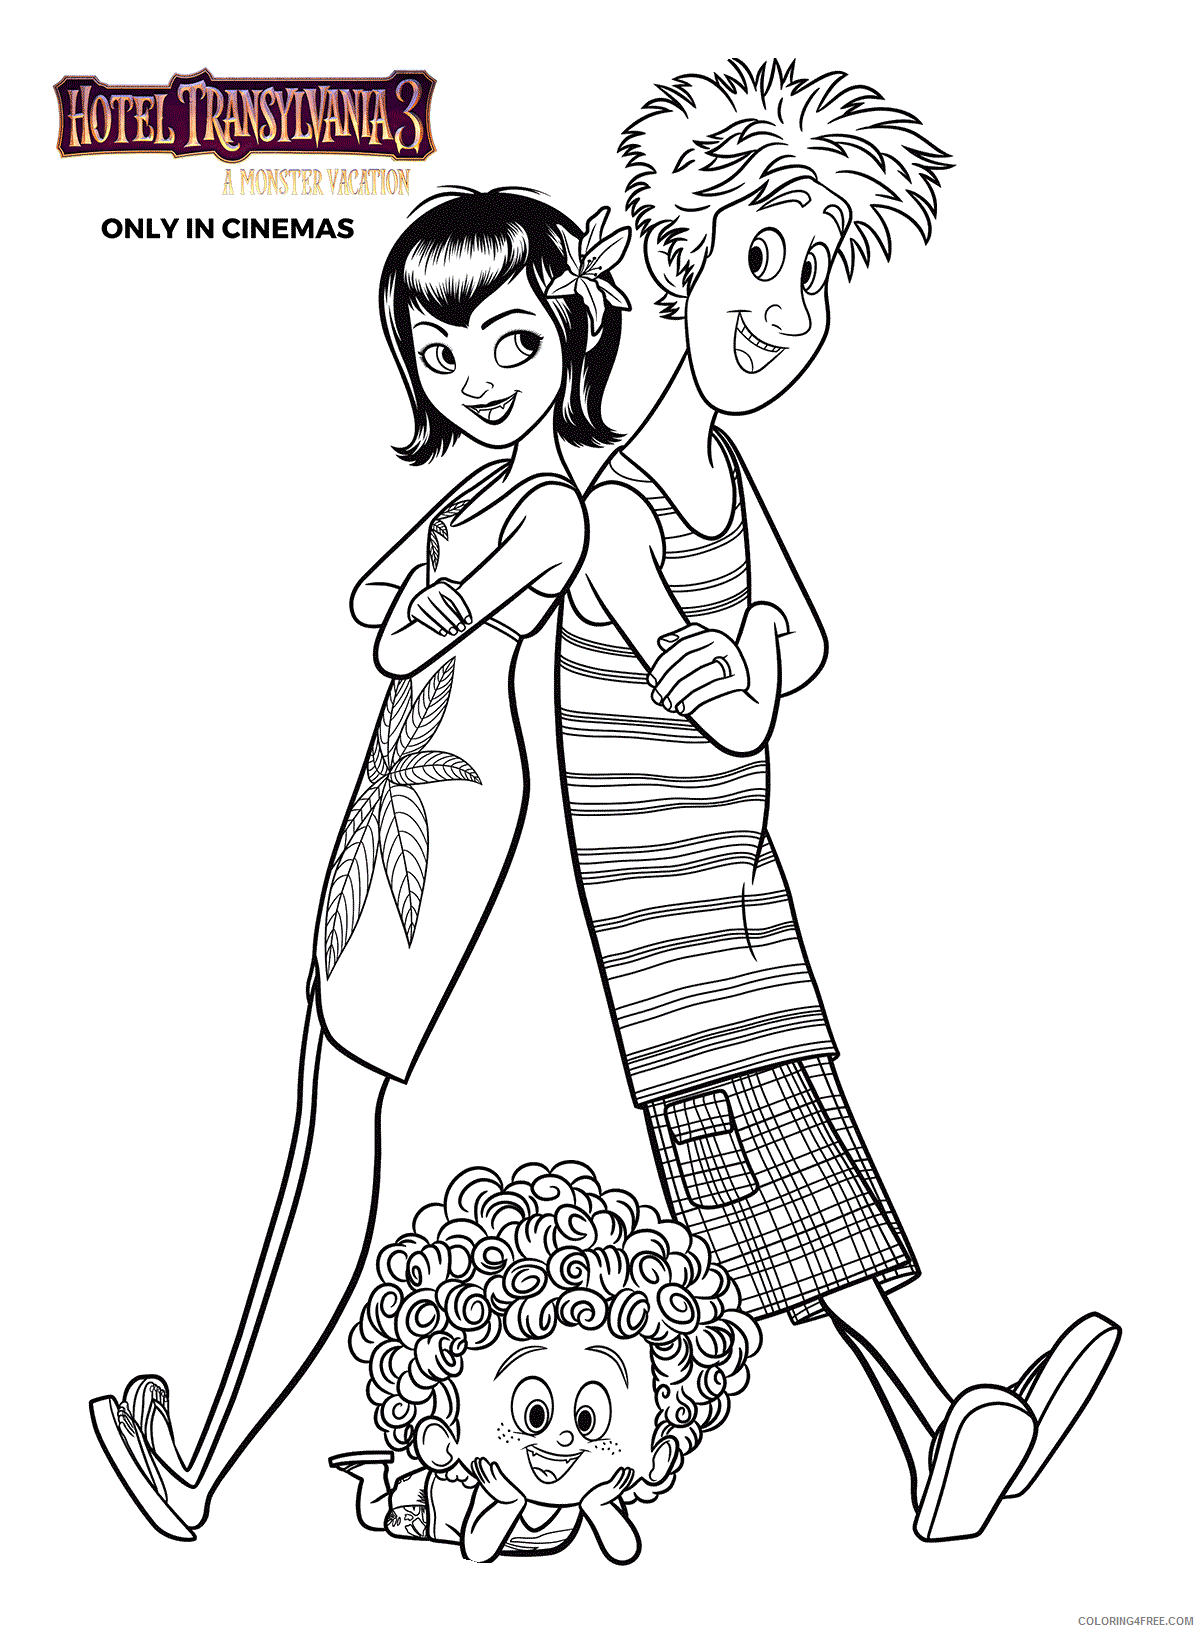 Hotel Transylvania Coloring Pages TV Film Printable 2020 03816 Coloring4free